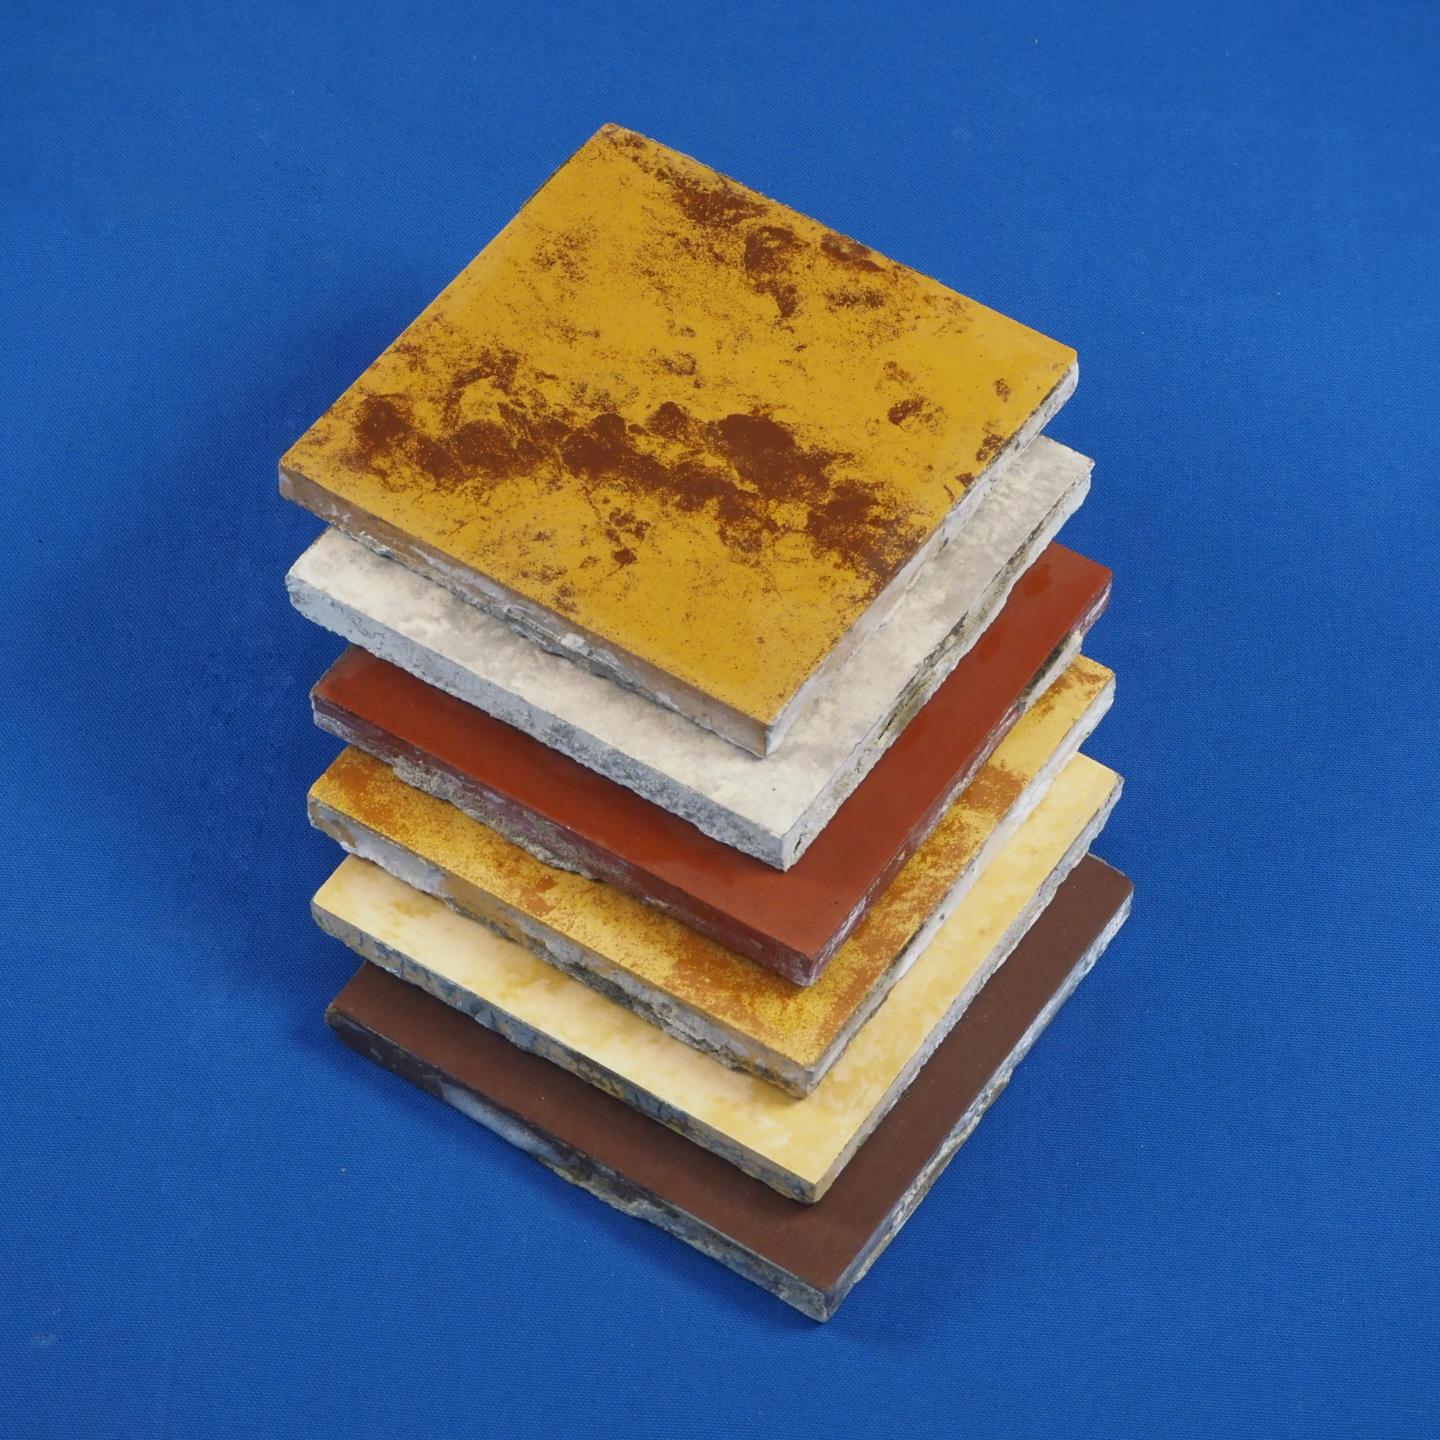 Cement tiles (15 x 15 cm) - Brown/yellow flamed